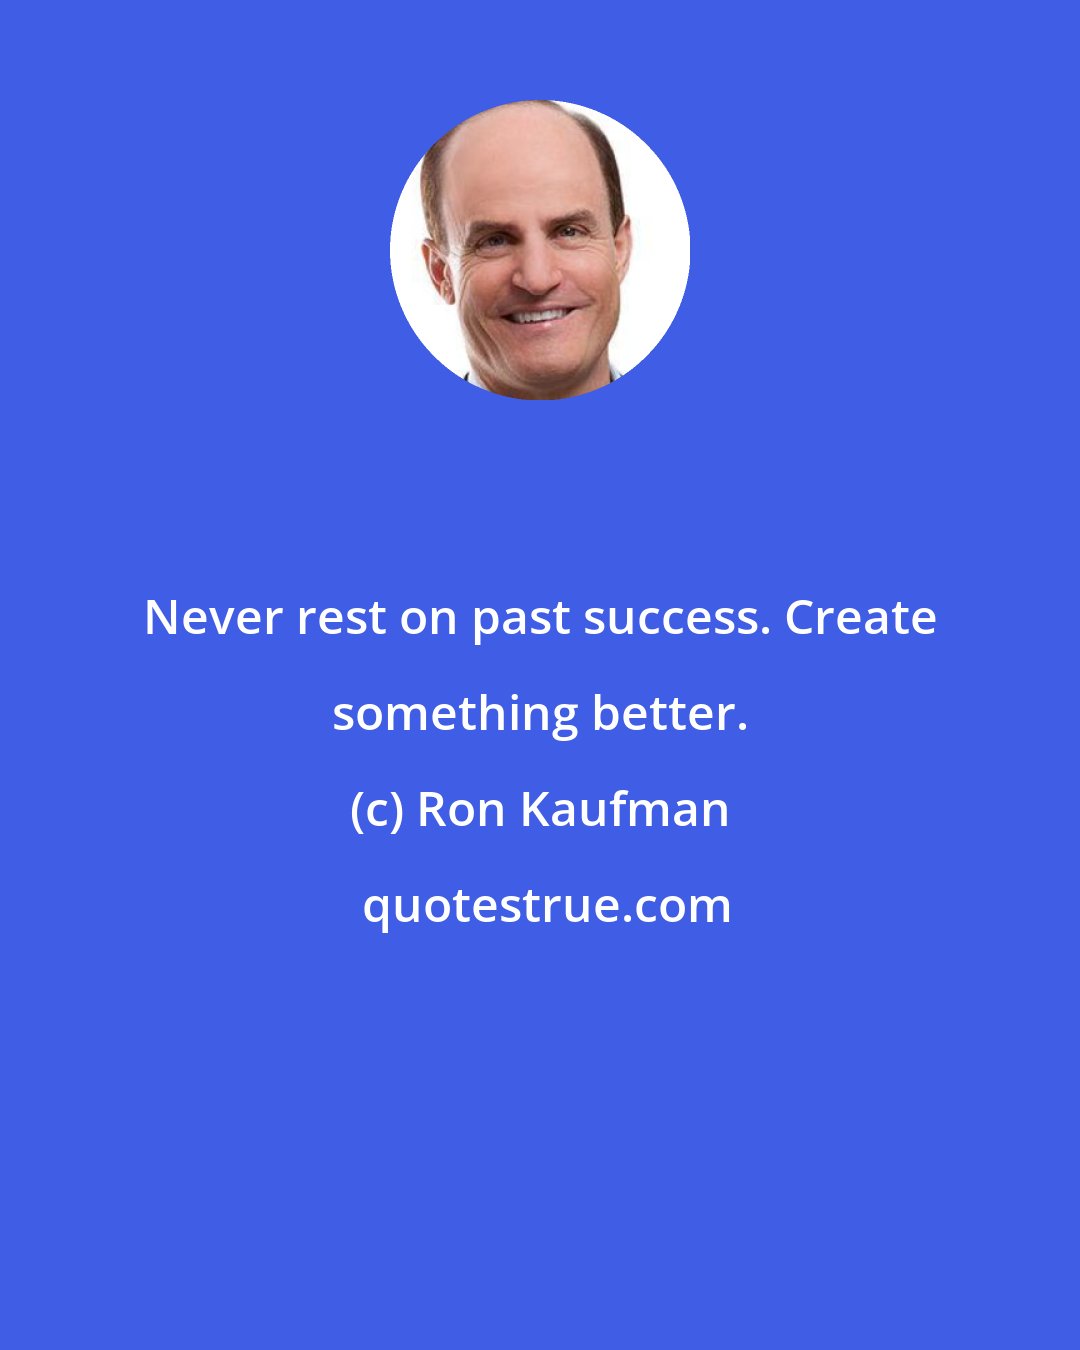 Ron Kaufman: Never rest on past success. Create something better.